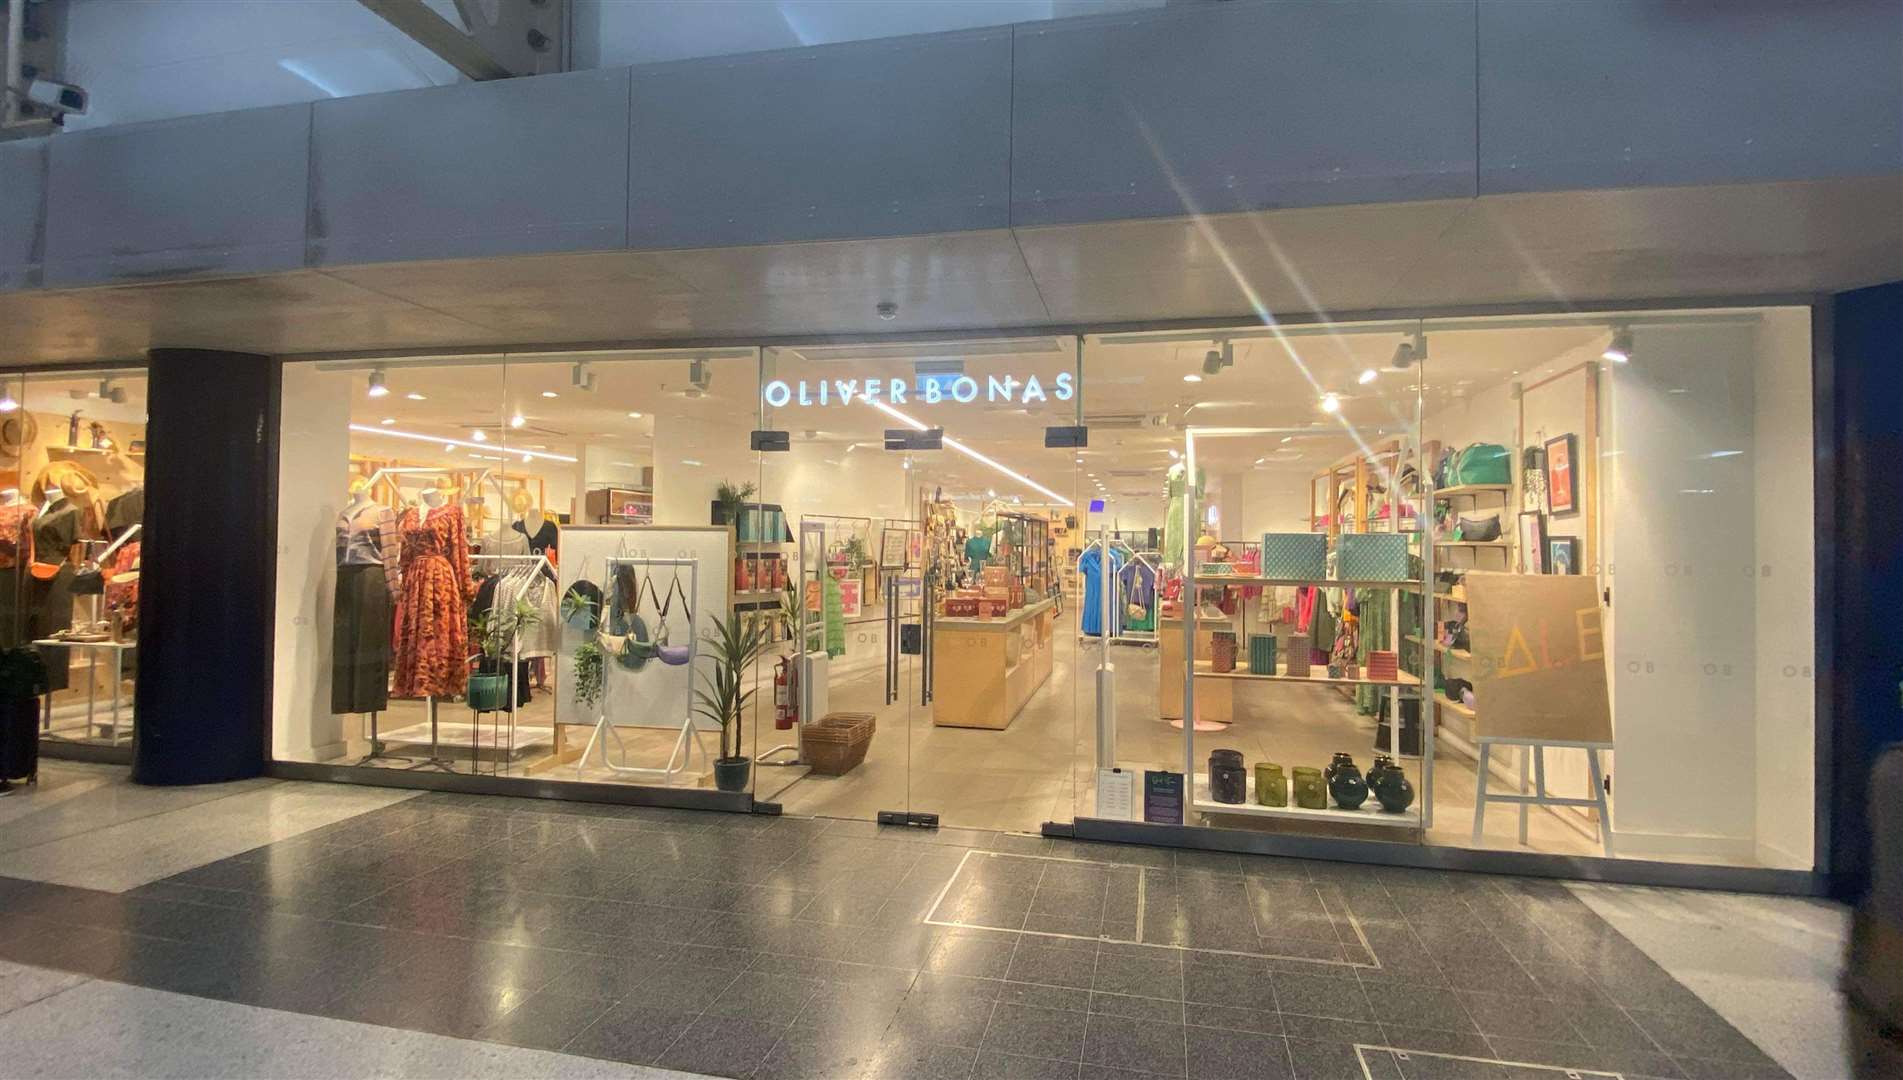 The Oliver Bonas store in London's Liverpool Street